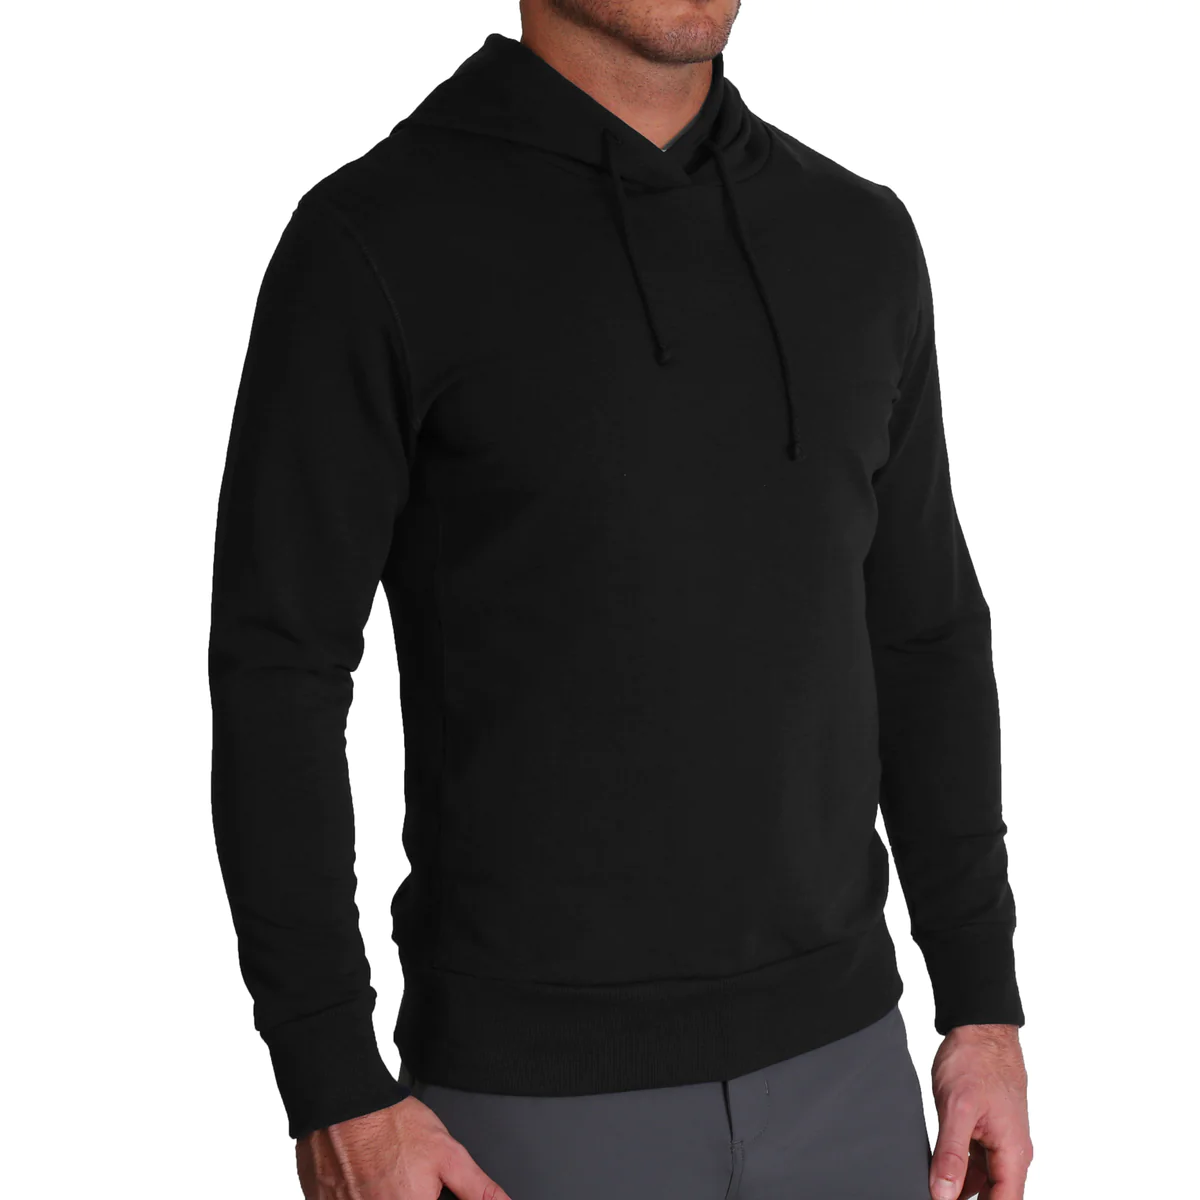 Solid black athletic fit hoodie by State & Liberty